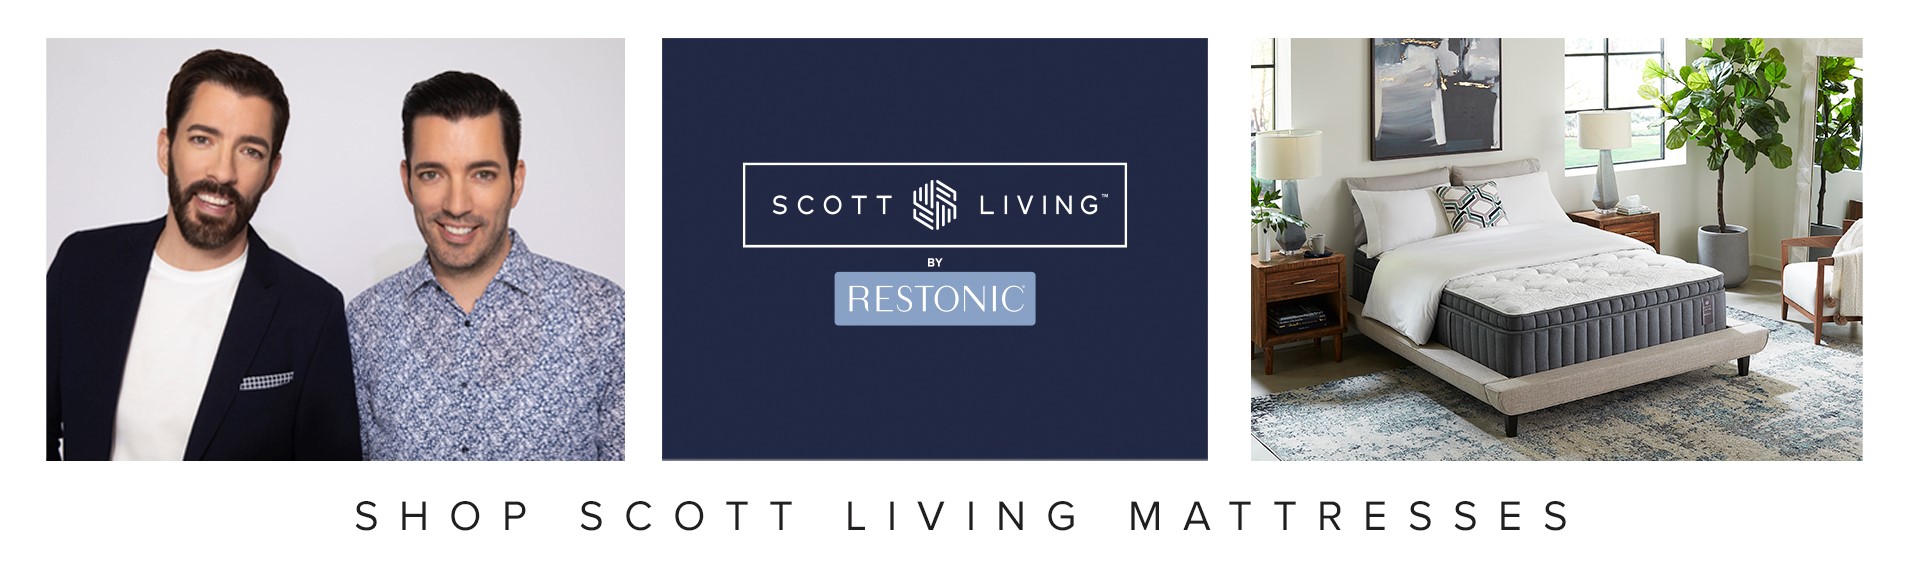 Got back pain and need a new mattress? Shop Scott Living mattresses and learn the difference between comfort and support.